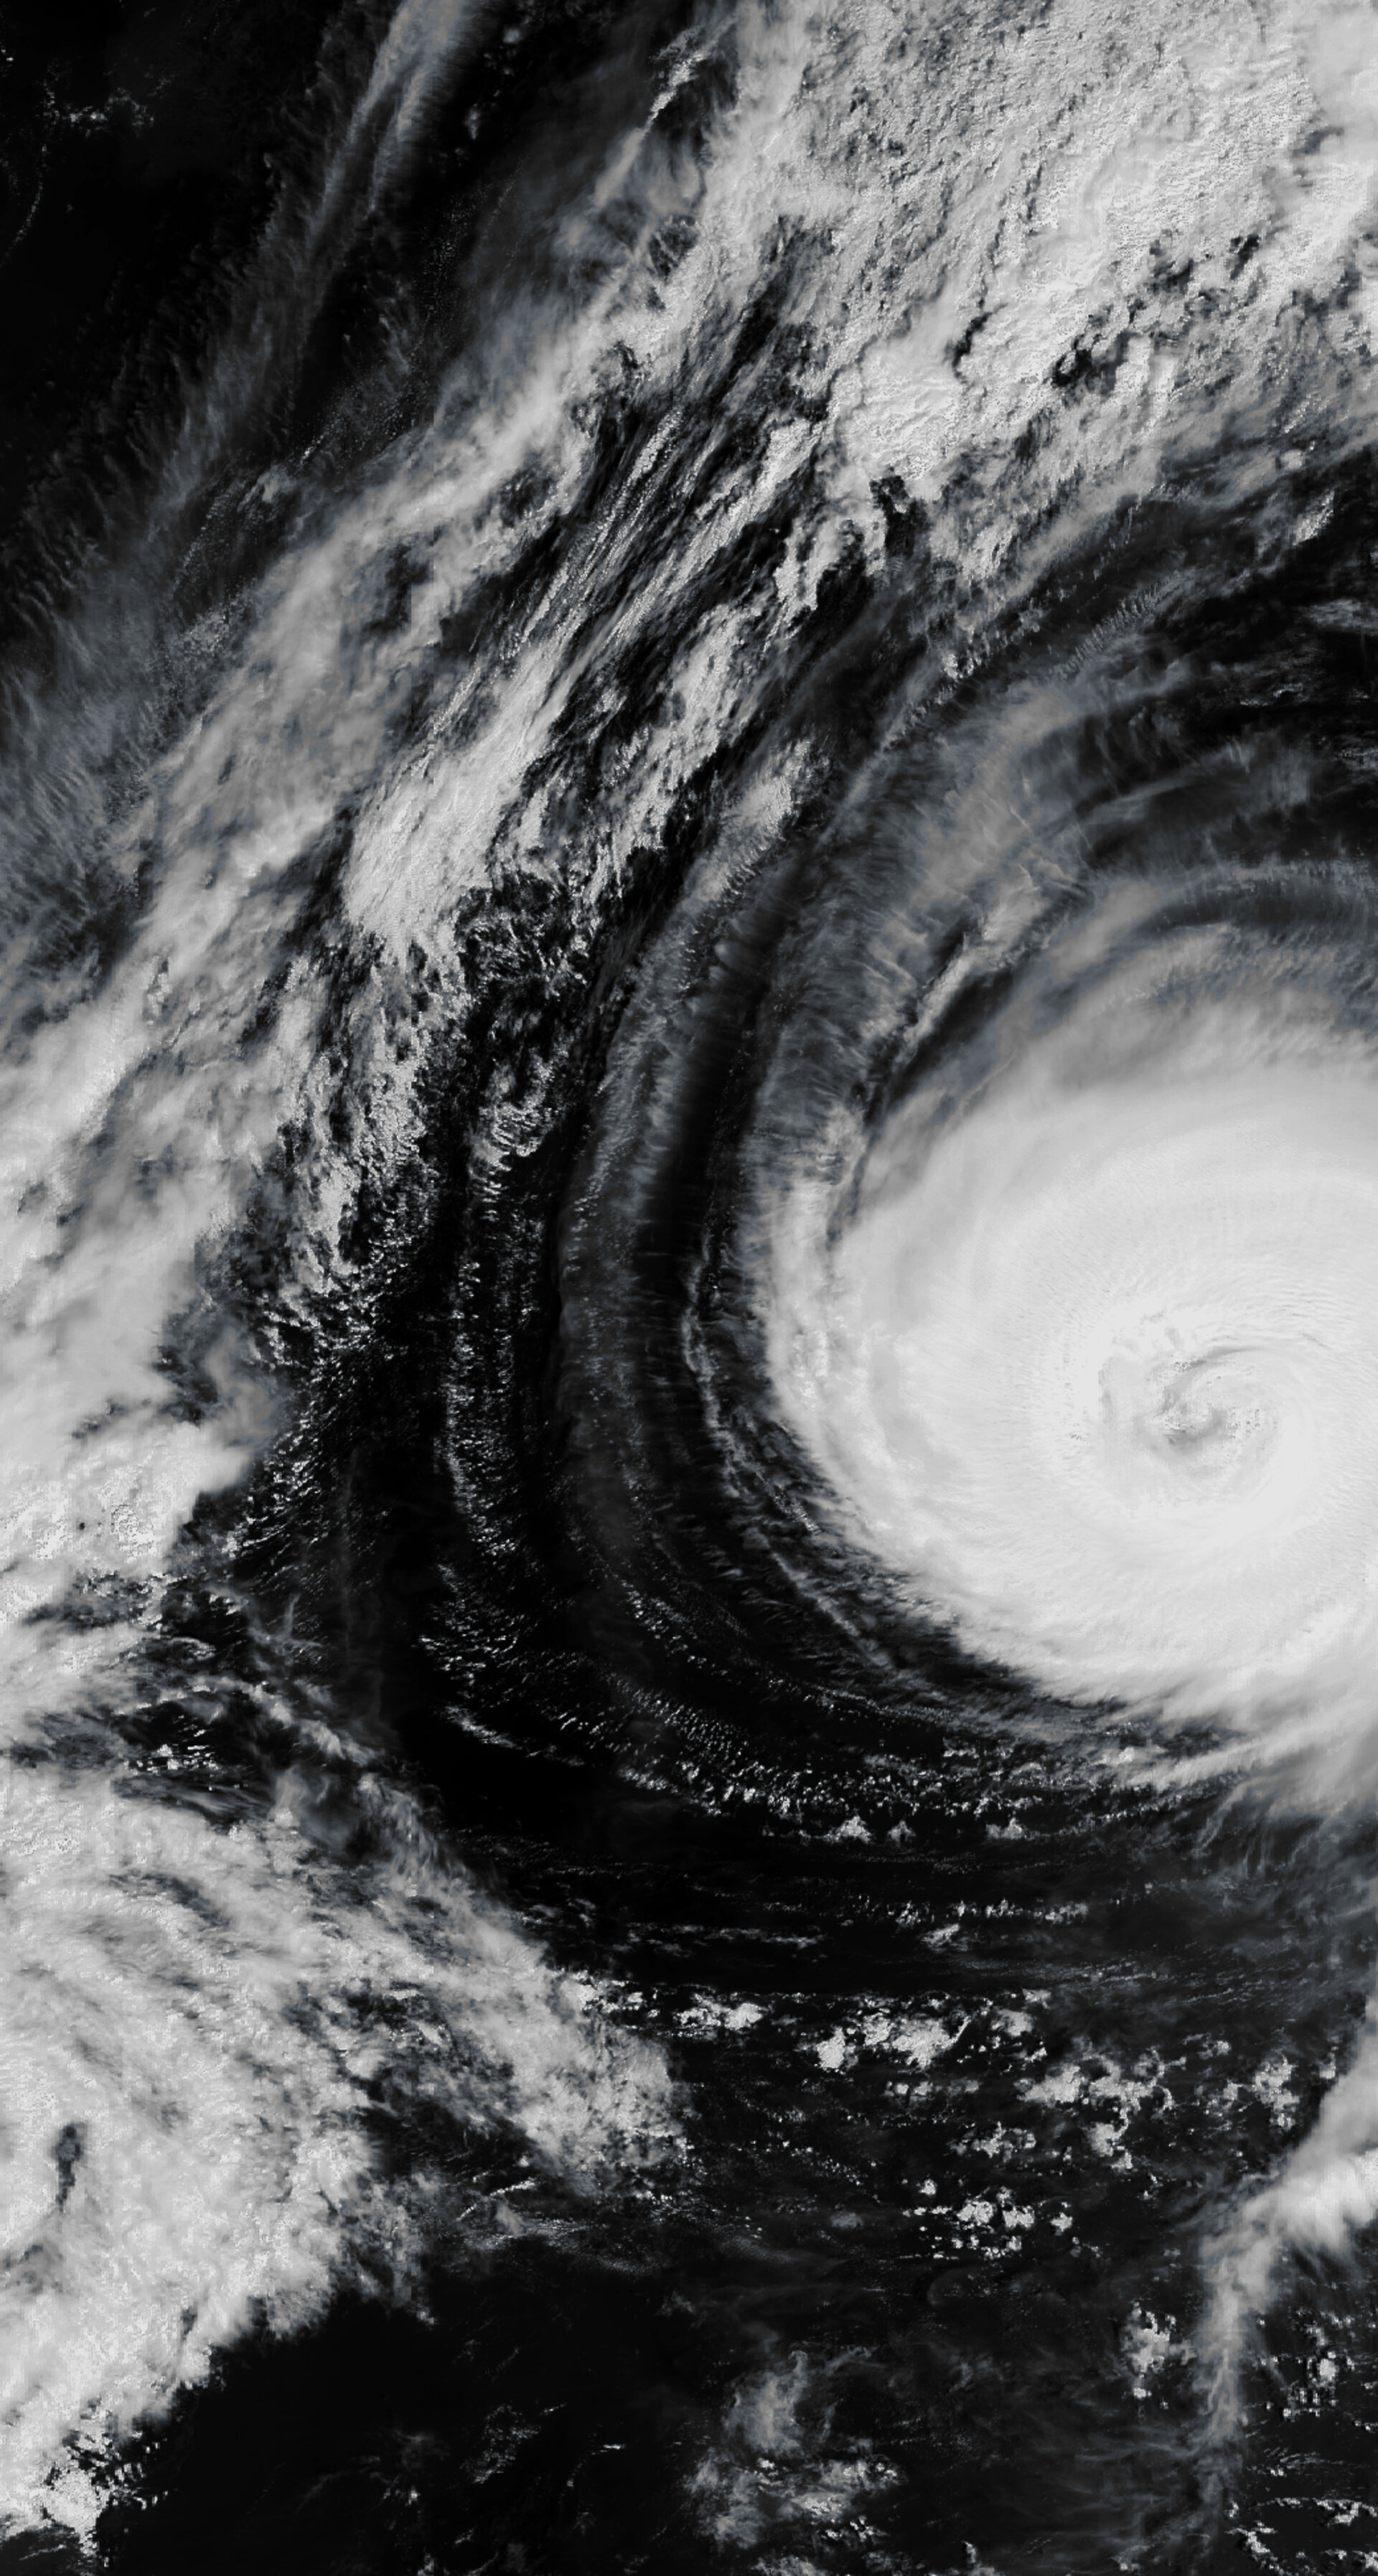 Typhoon Melor spinning in the Pacific Ocean